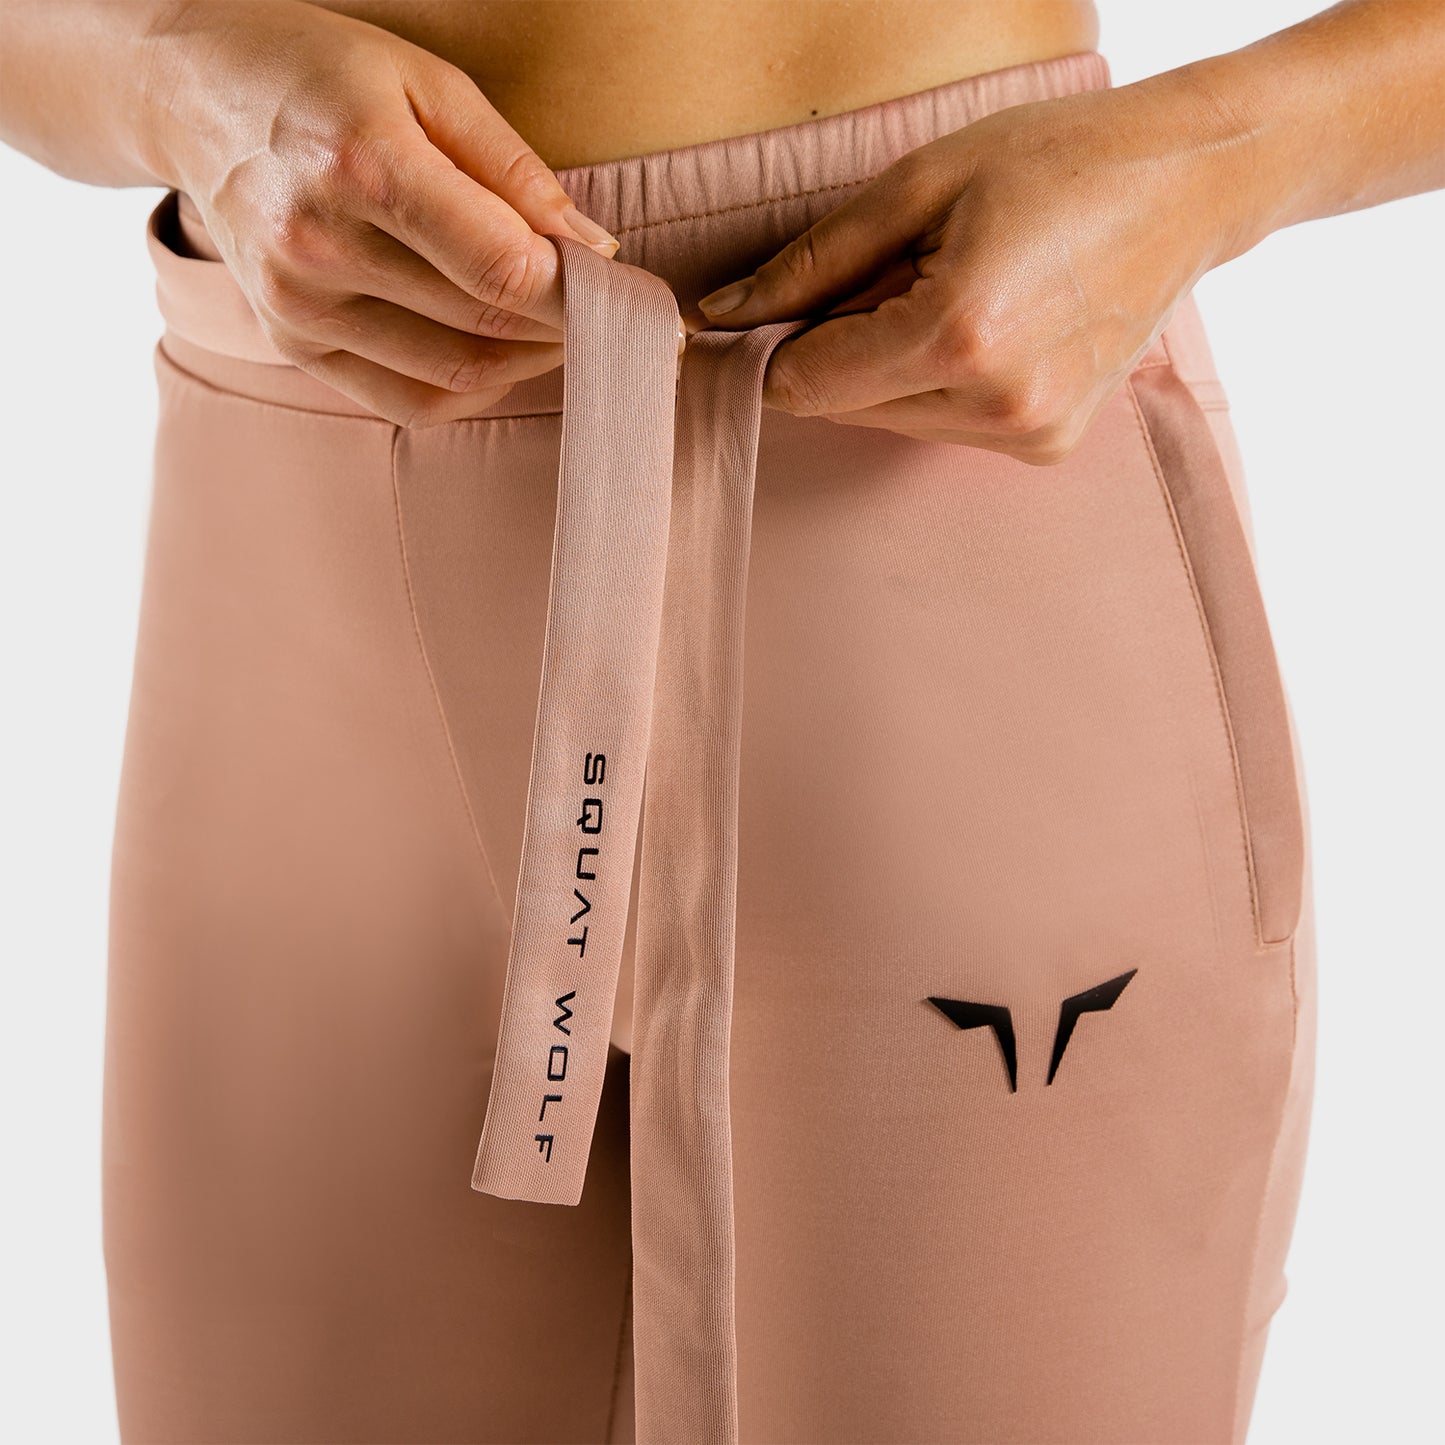 squatwolf-gym-pants-for-women-she-wolf-do-knot-joggers-dusty-rose-workout-clothes